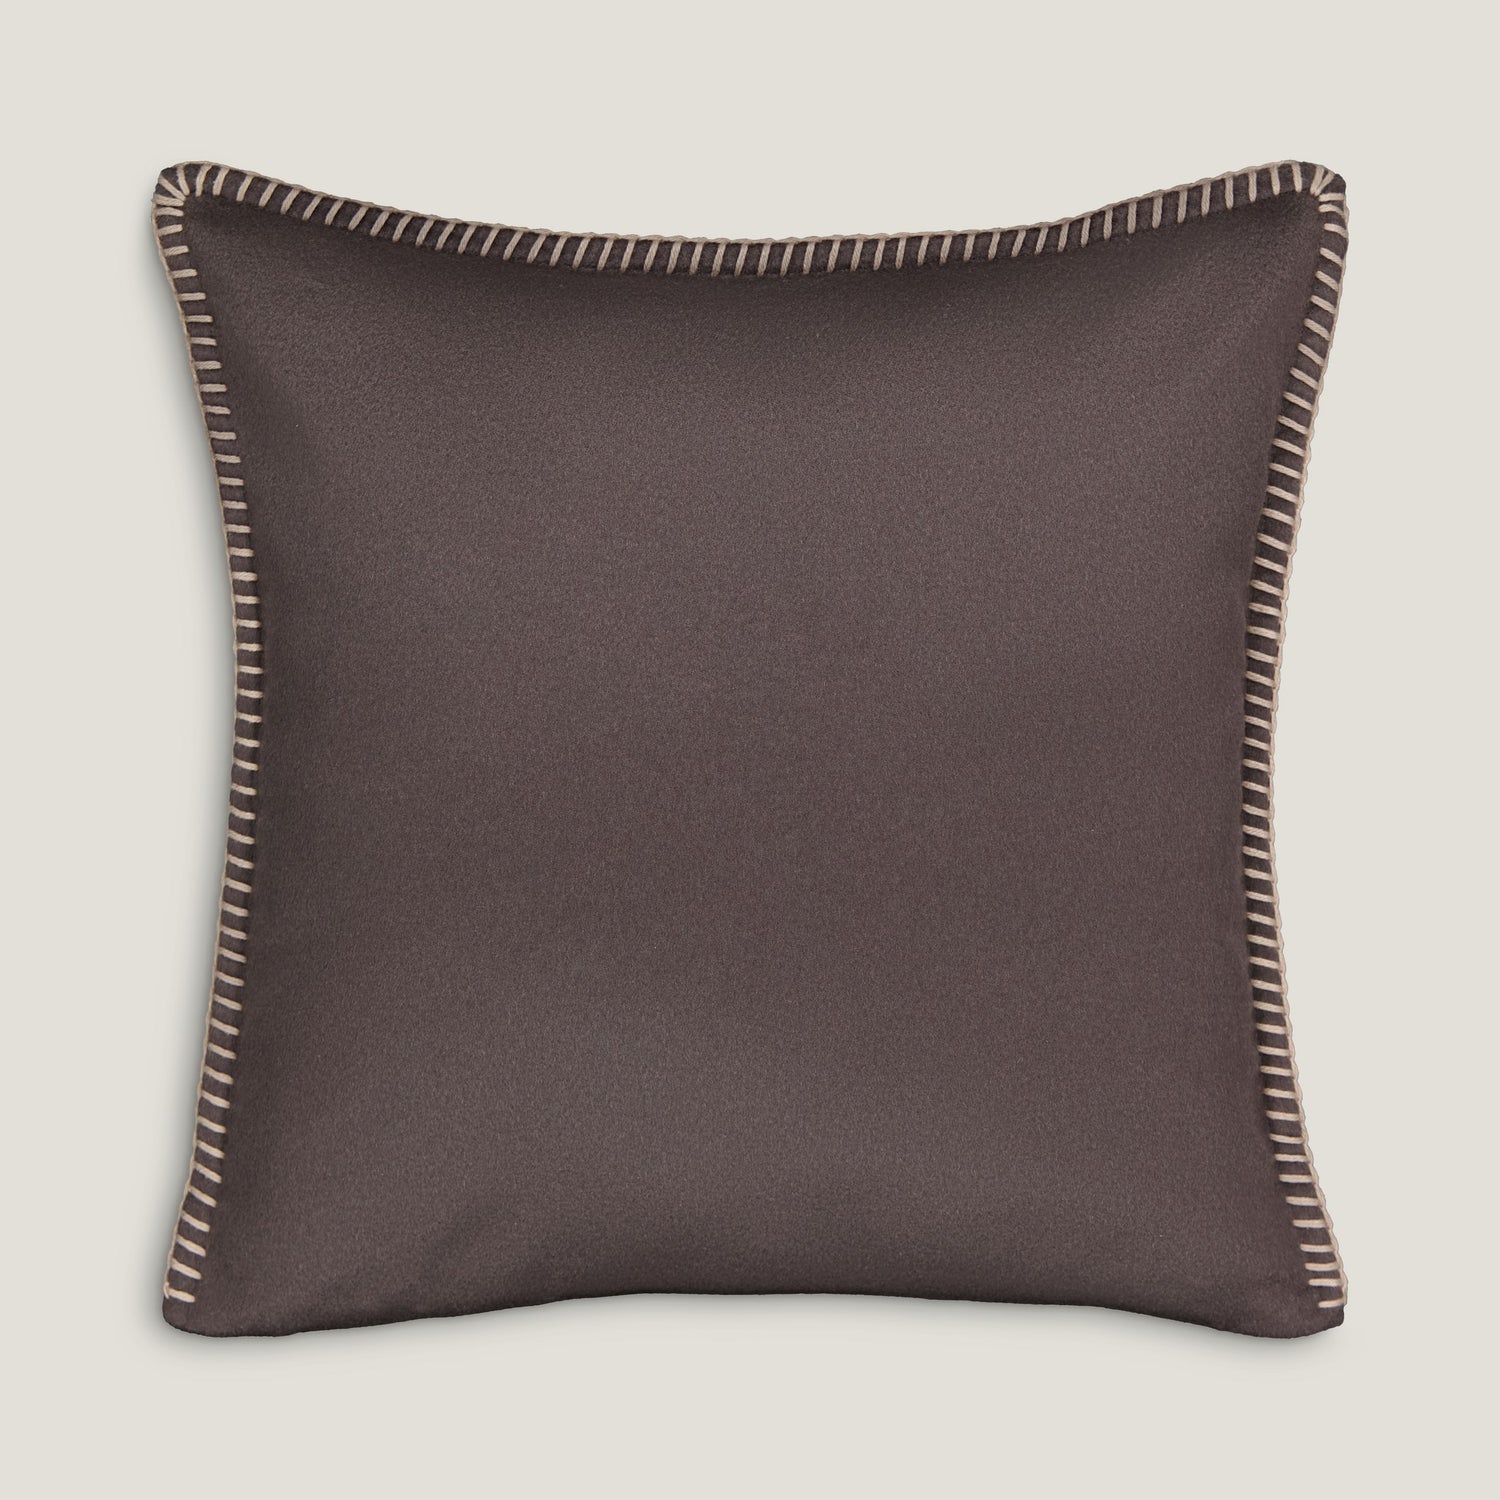 Pure Cashmere Pillow Cover Brown Marron ブラウン 棕色